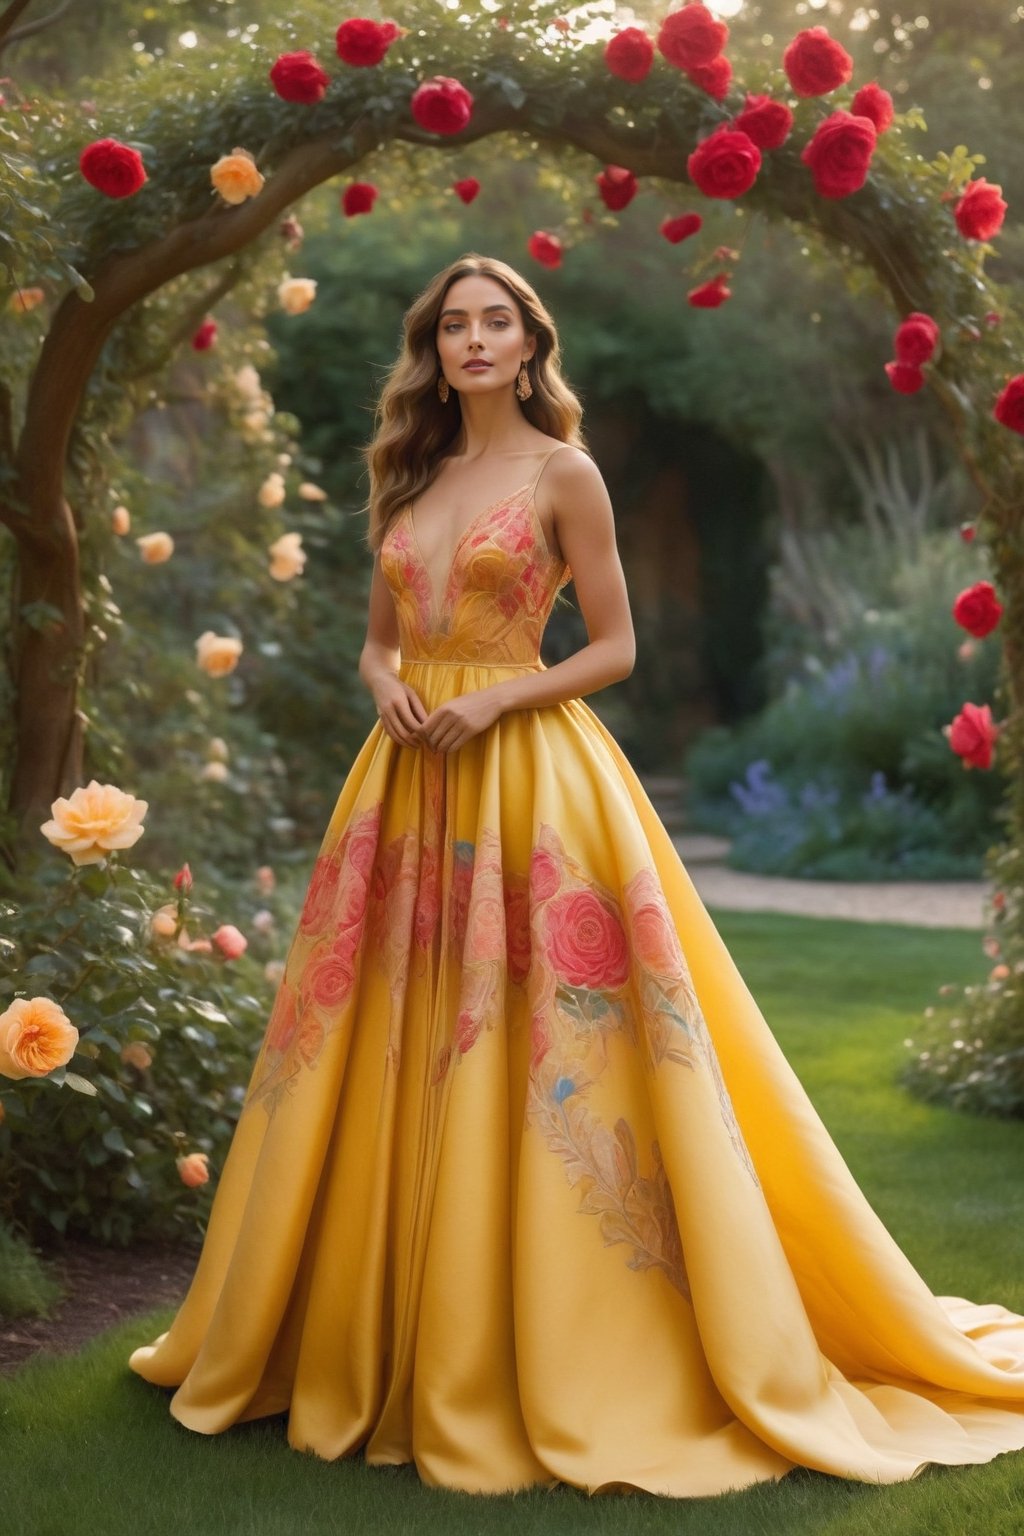 In an Art Nouveau-inspired setting, a young woman in an elegant dress, adorned with flowing floral motifs, tenderly plants a blooming rose tree in her enchanting, abstract backyard filled with whimsical, intertwining flora and fauna. The tree's vibrant petals emit kaleidoscopic hues, symbolizing growth, hope, and transformation.